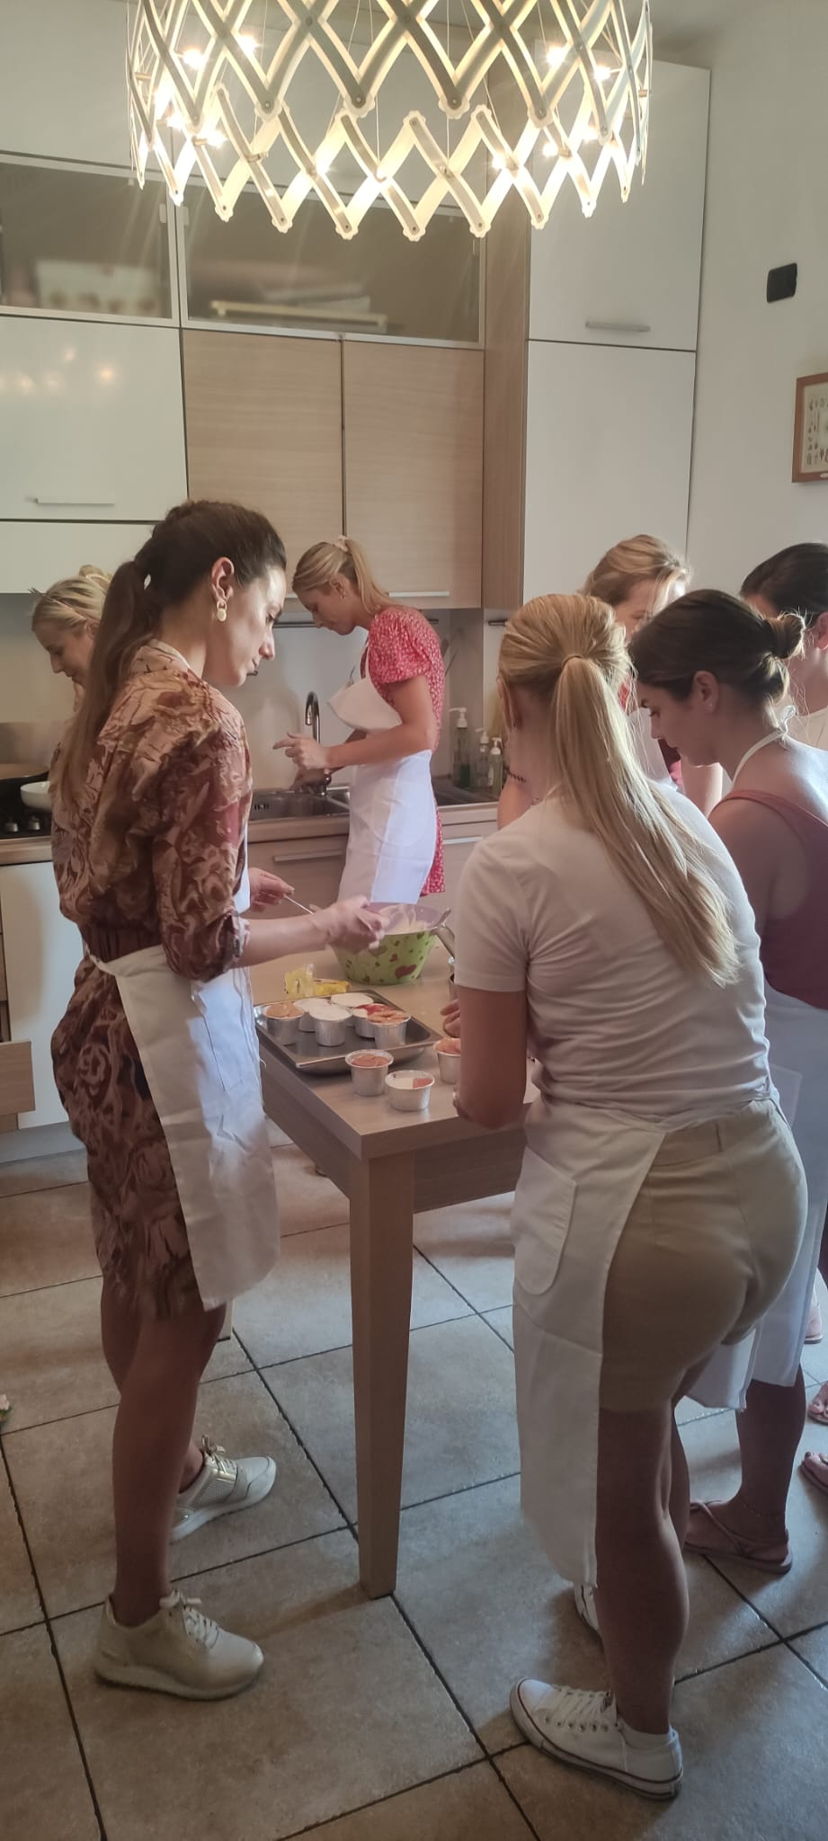 Cooking classes Verona: Bachelorette party in the city of Romeo and Juliet